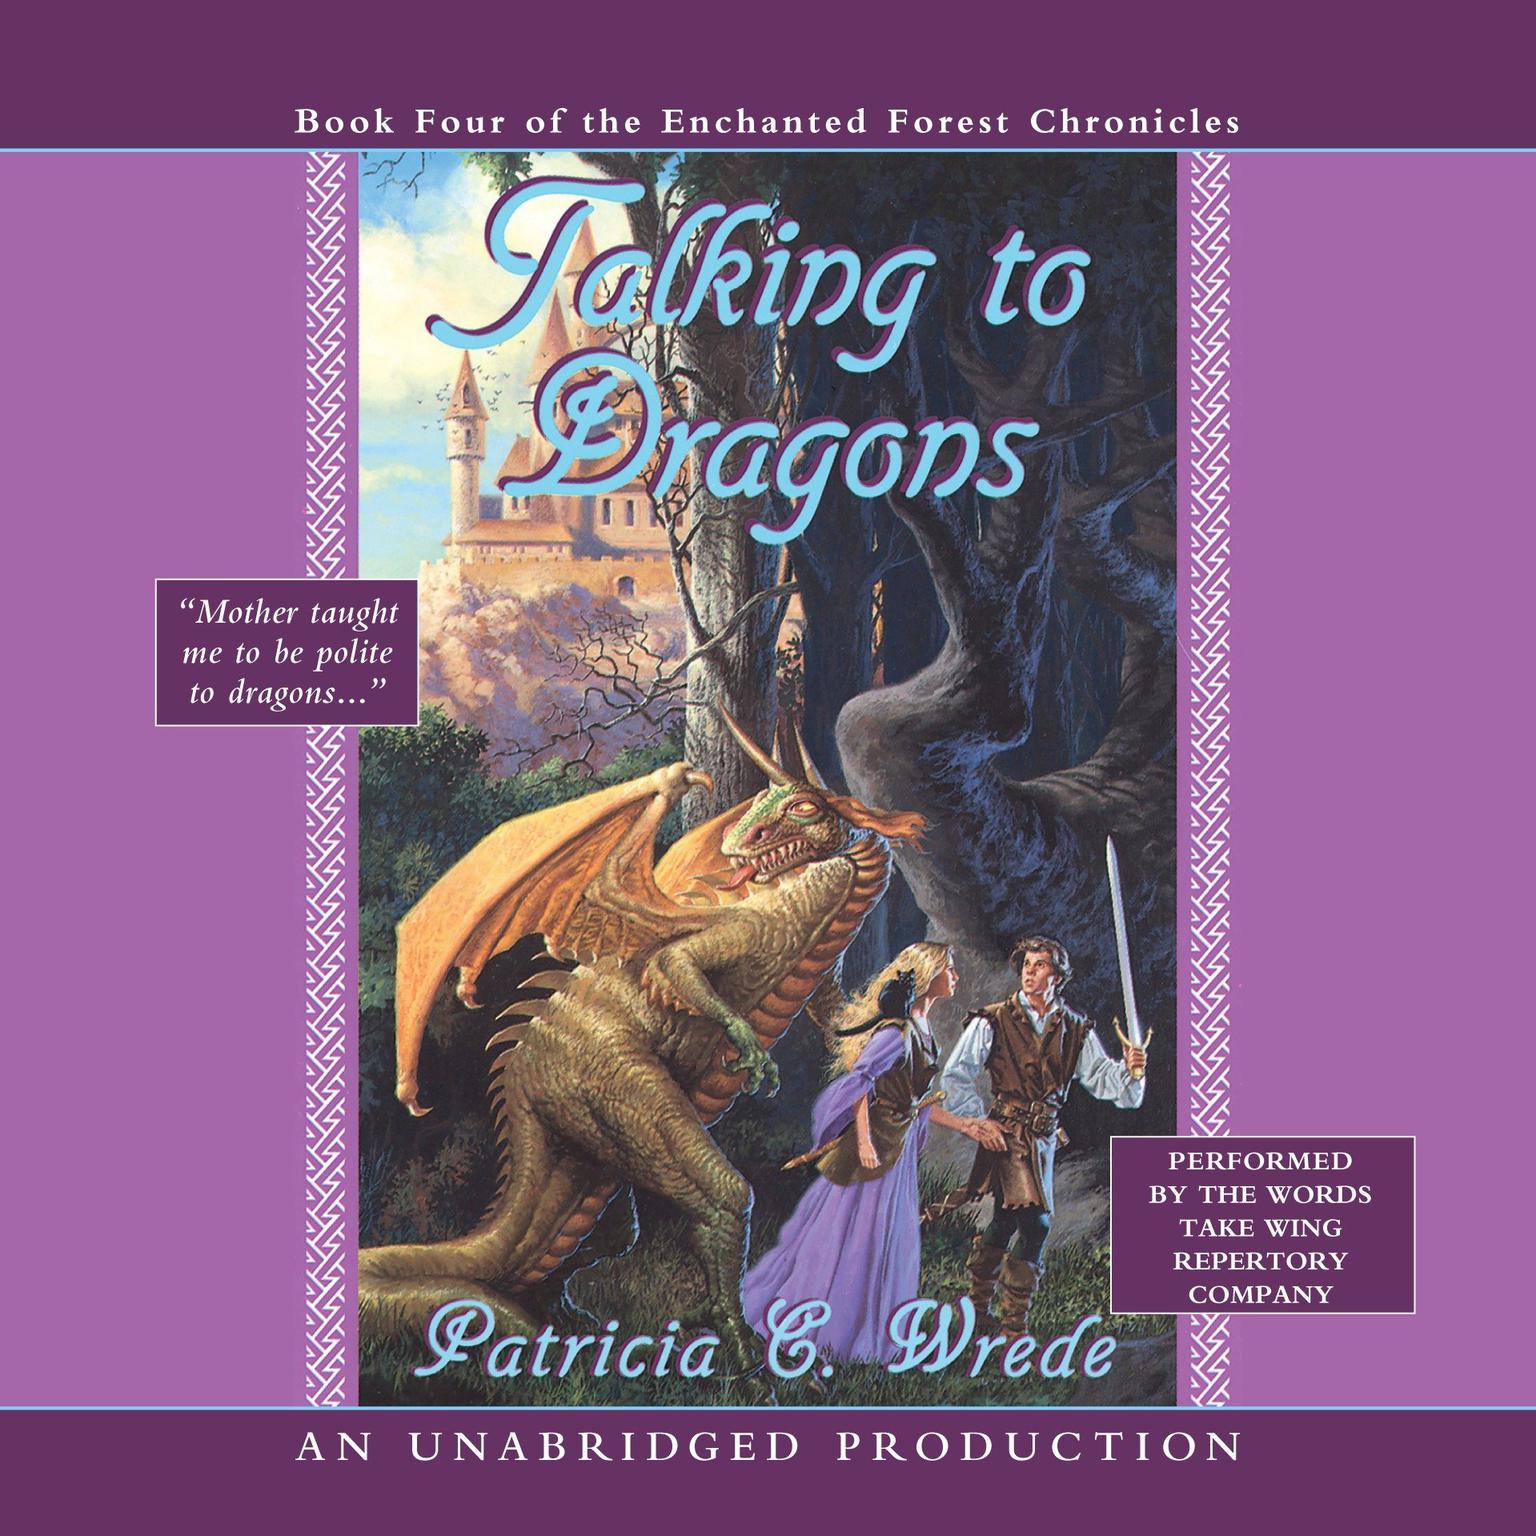 The Enchanted Forest Chronicles Book Four: Talking to Dragons: Book Four of the Enchanted Forest Chronicles Audiobook, by Patricia C. Wrede